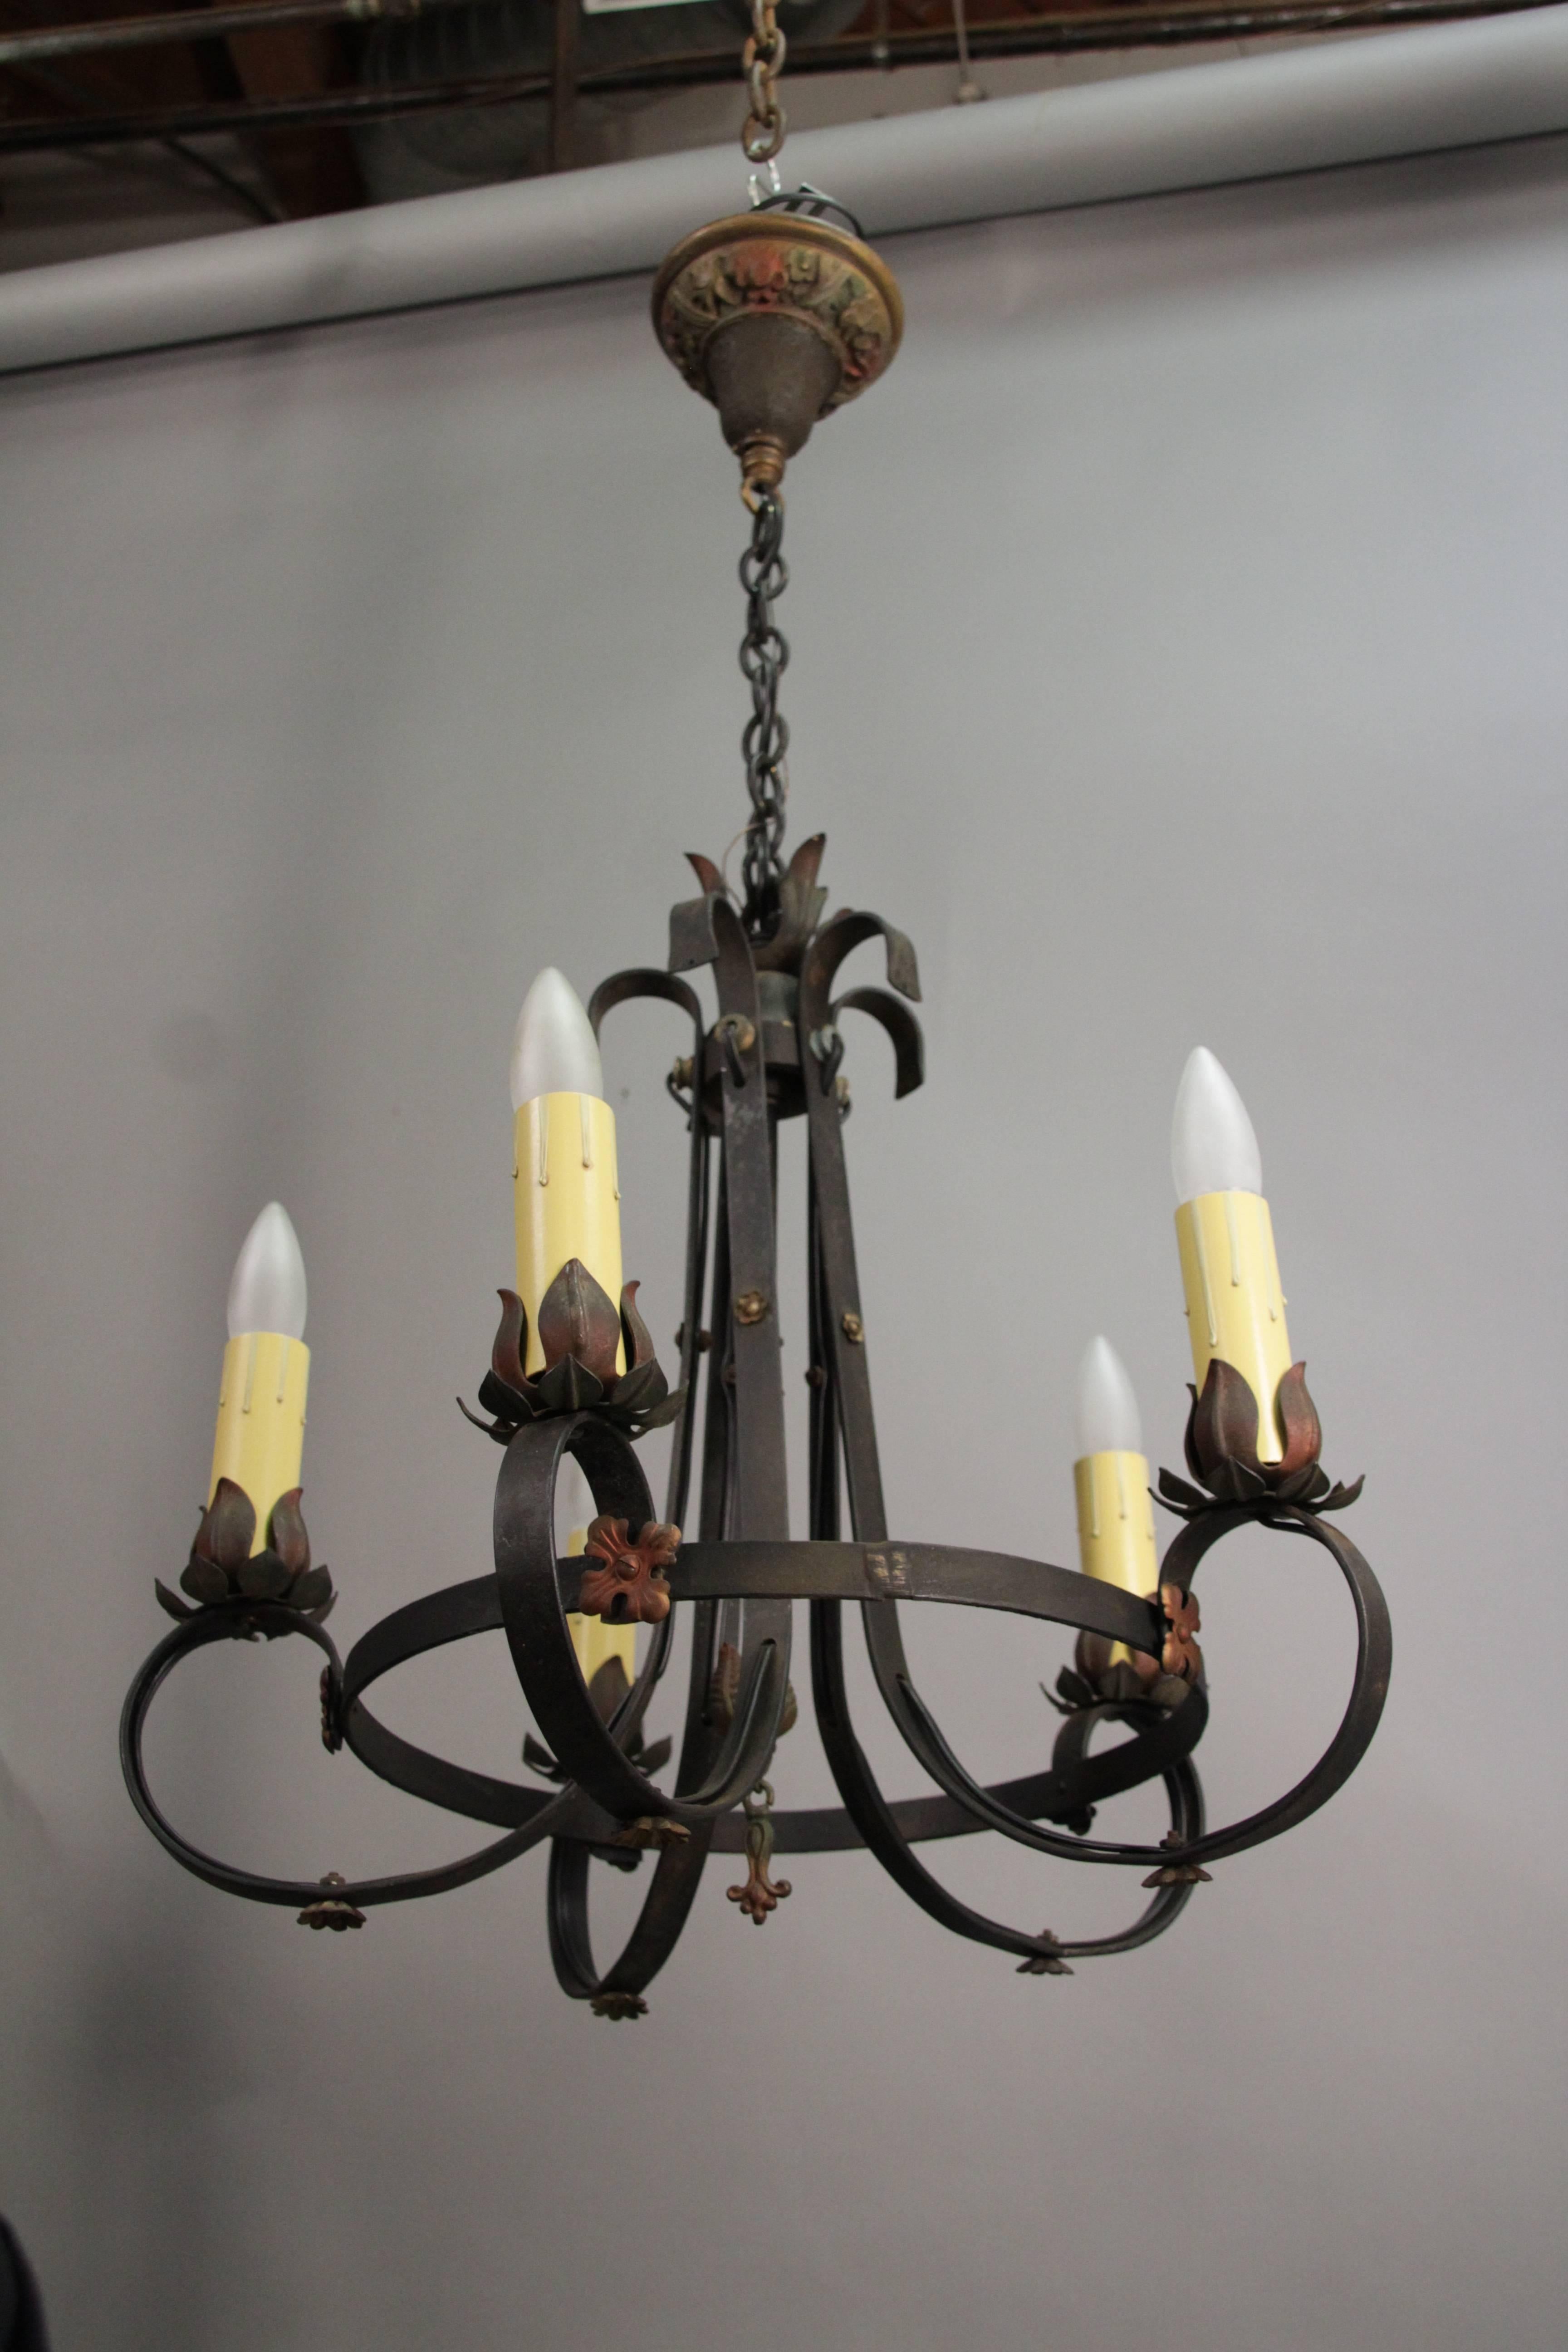 Classic Spanish Revival chandelier with original finish, circa 1920s.